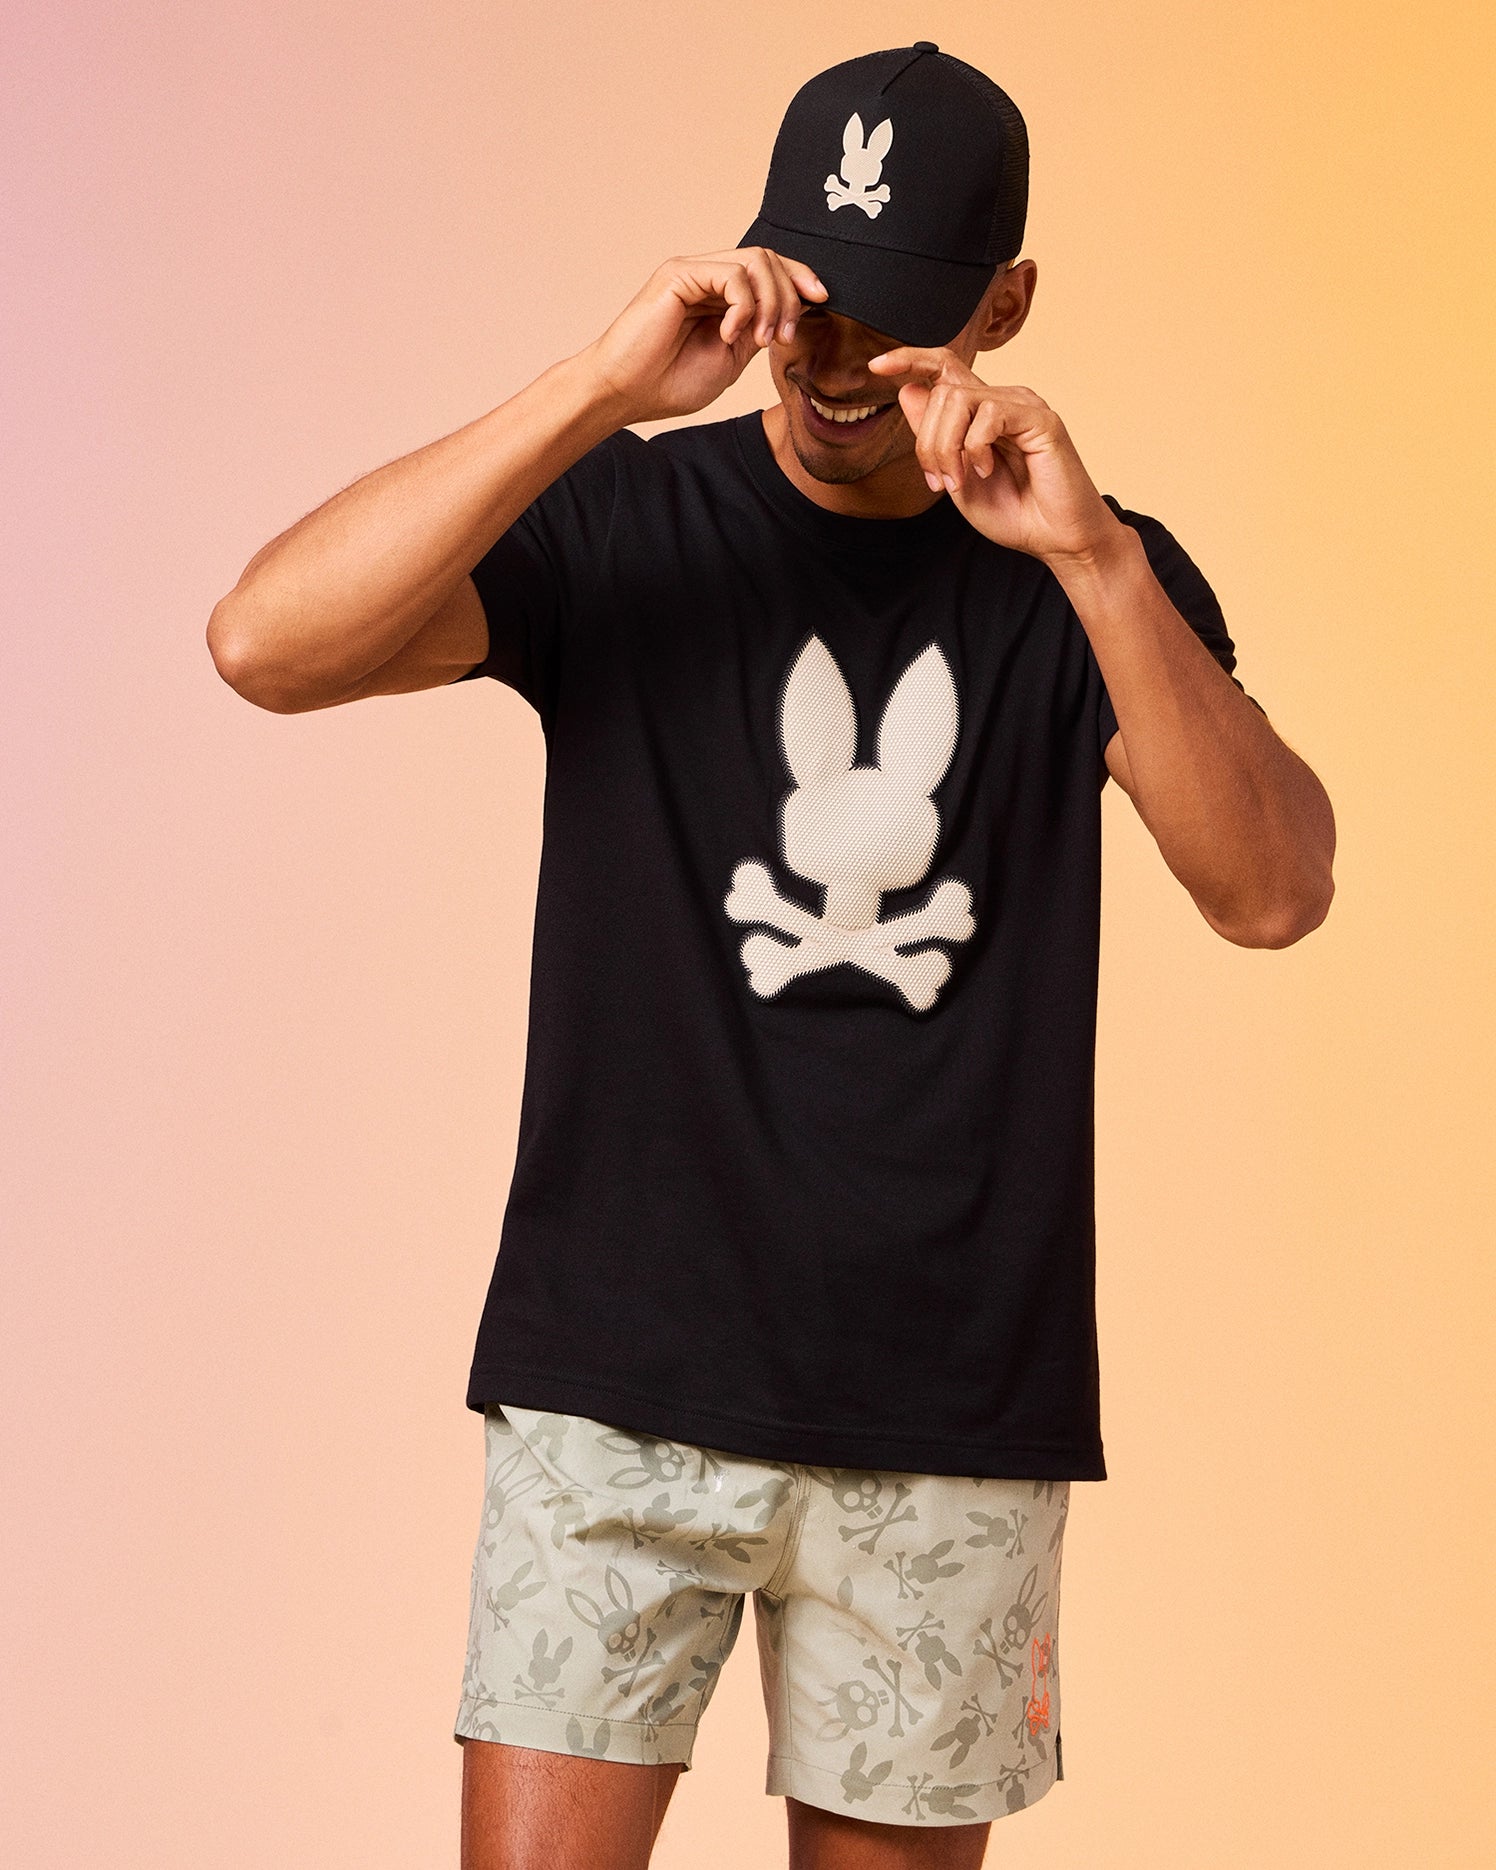 A person wearing a black cap and a Psycho Bunny MENS RIVIERA GRAPHIC TEE - B6U639C200 with a skull and rabbit ears design. They are also wearing light-colored shorts with a pattern. The person is adjusting their cap while smiling. The background has a gradient of light pink and orange colors.